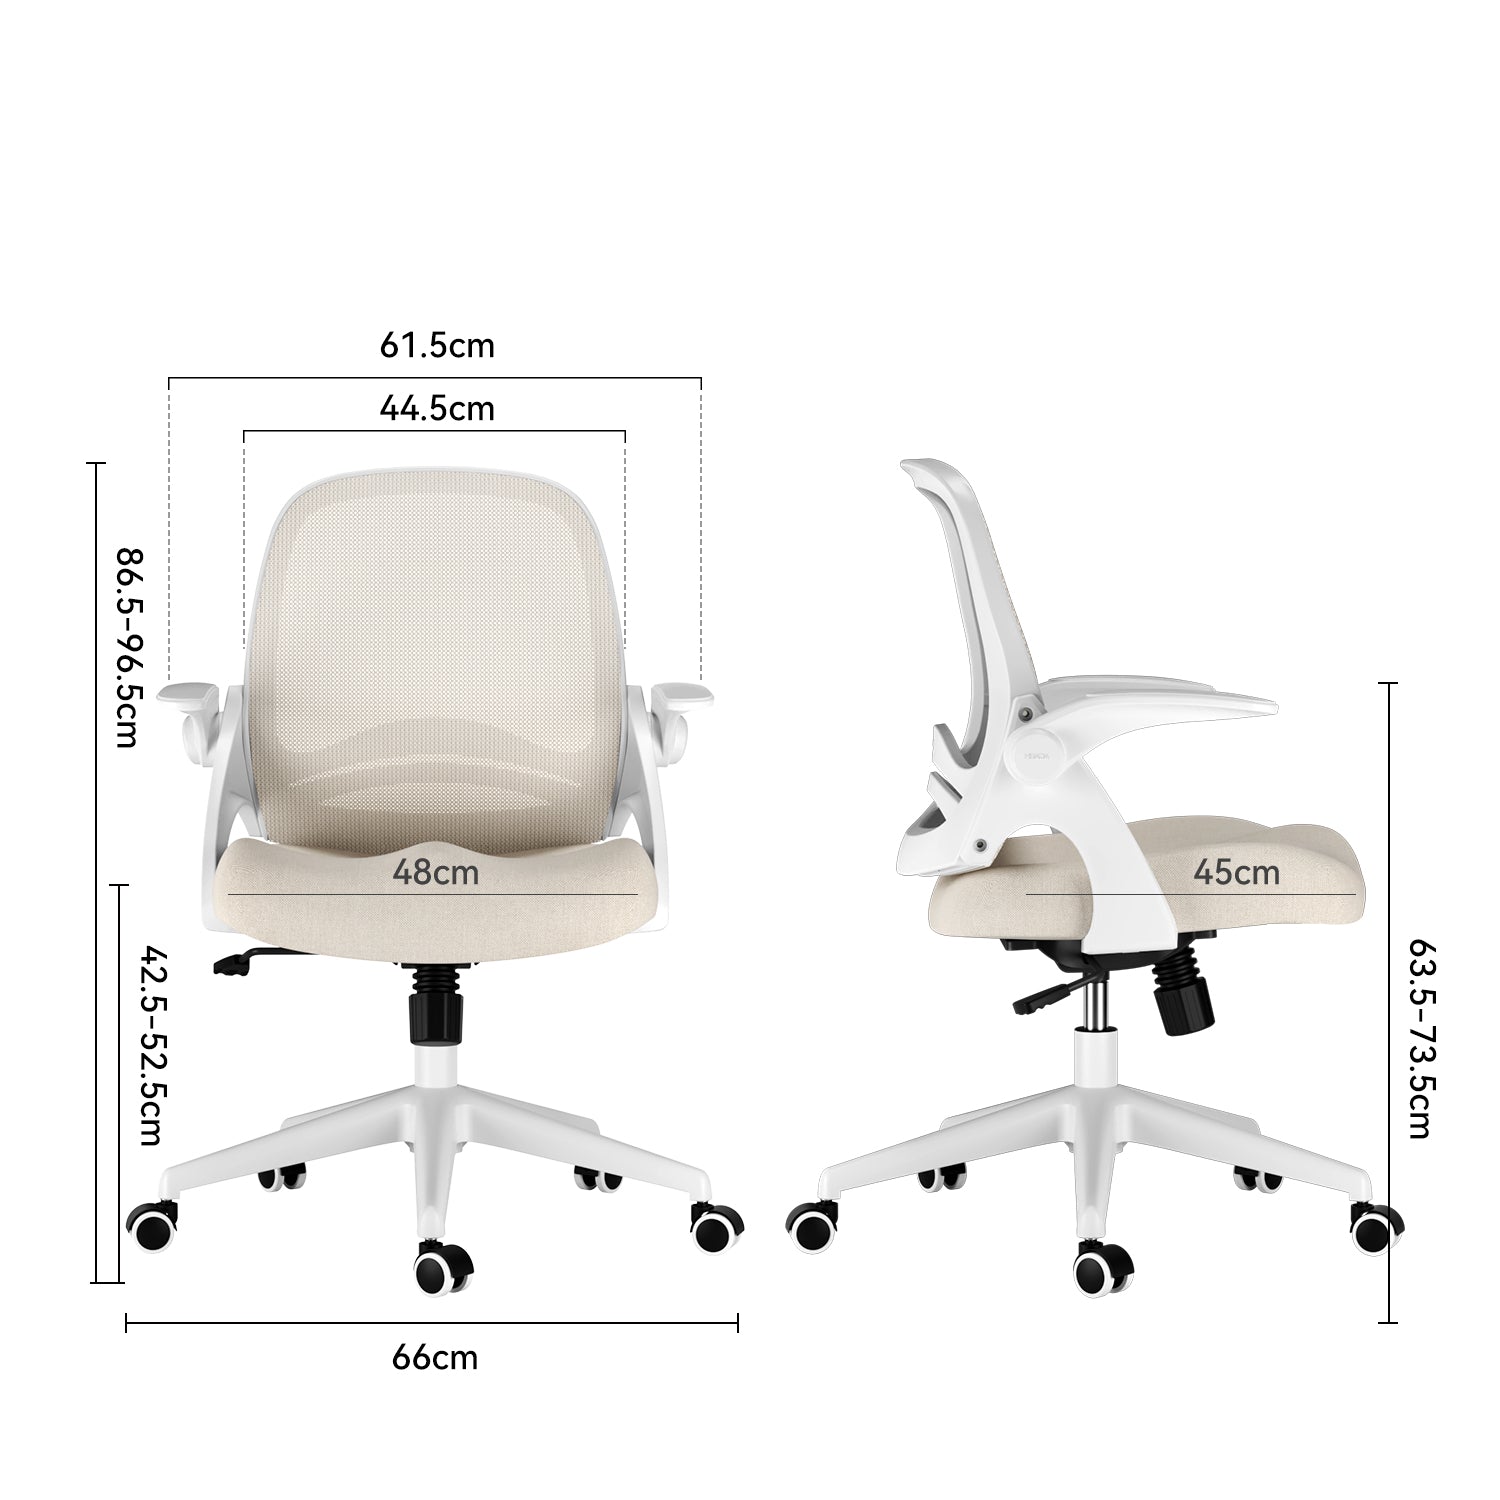 HBADA Penguin-inspired Office Chair, Gray Color